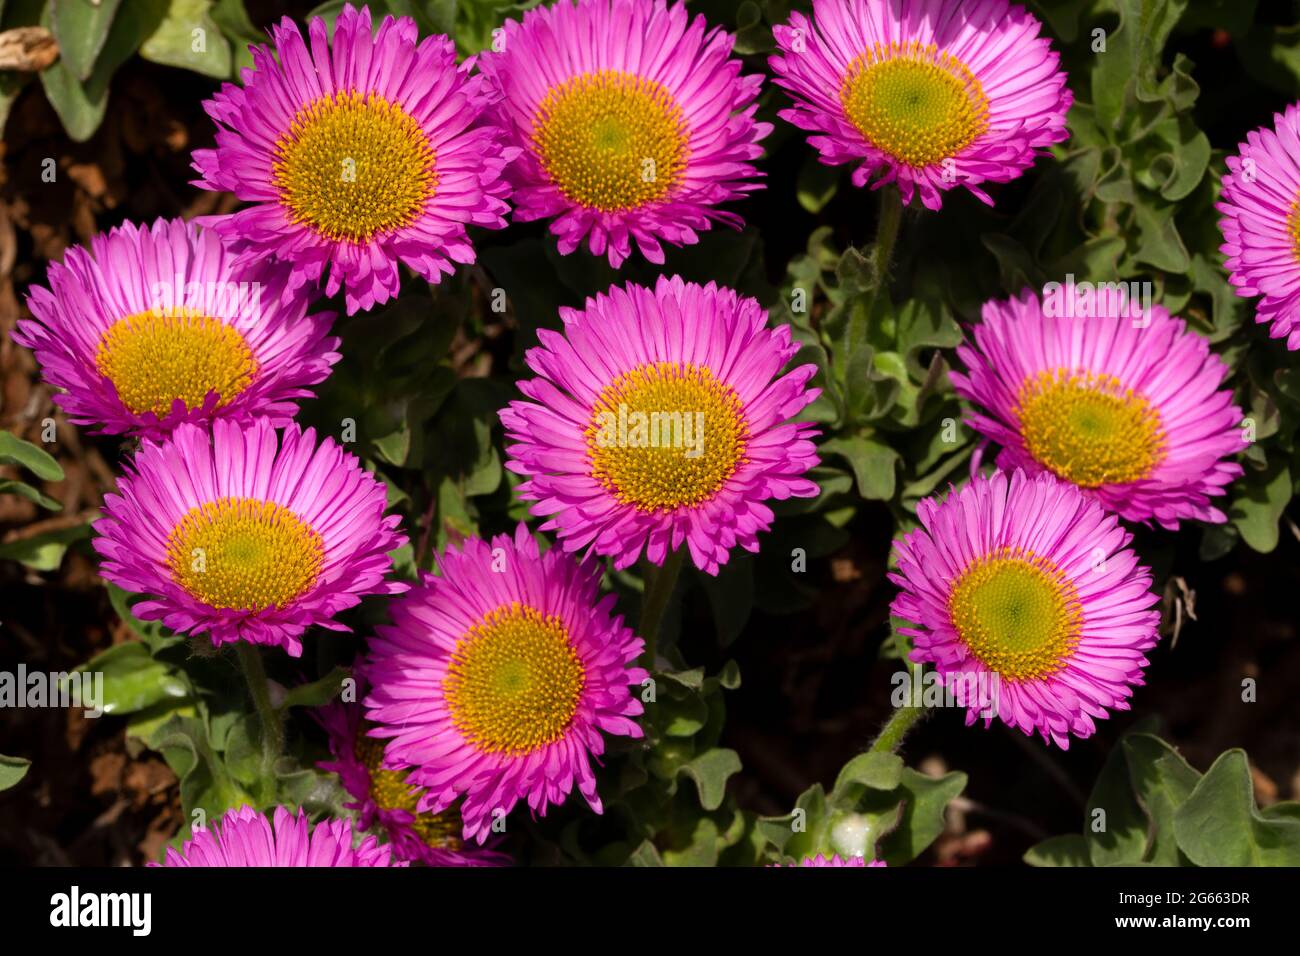 A spectacular member of the Daisy family, The One-flower Fleabane or Glacial daisy is a flower of the Artic and Alpine regions. Stock Photo